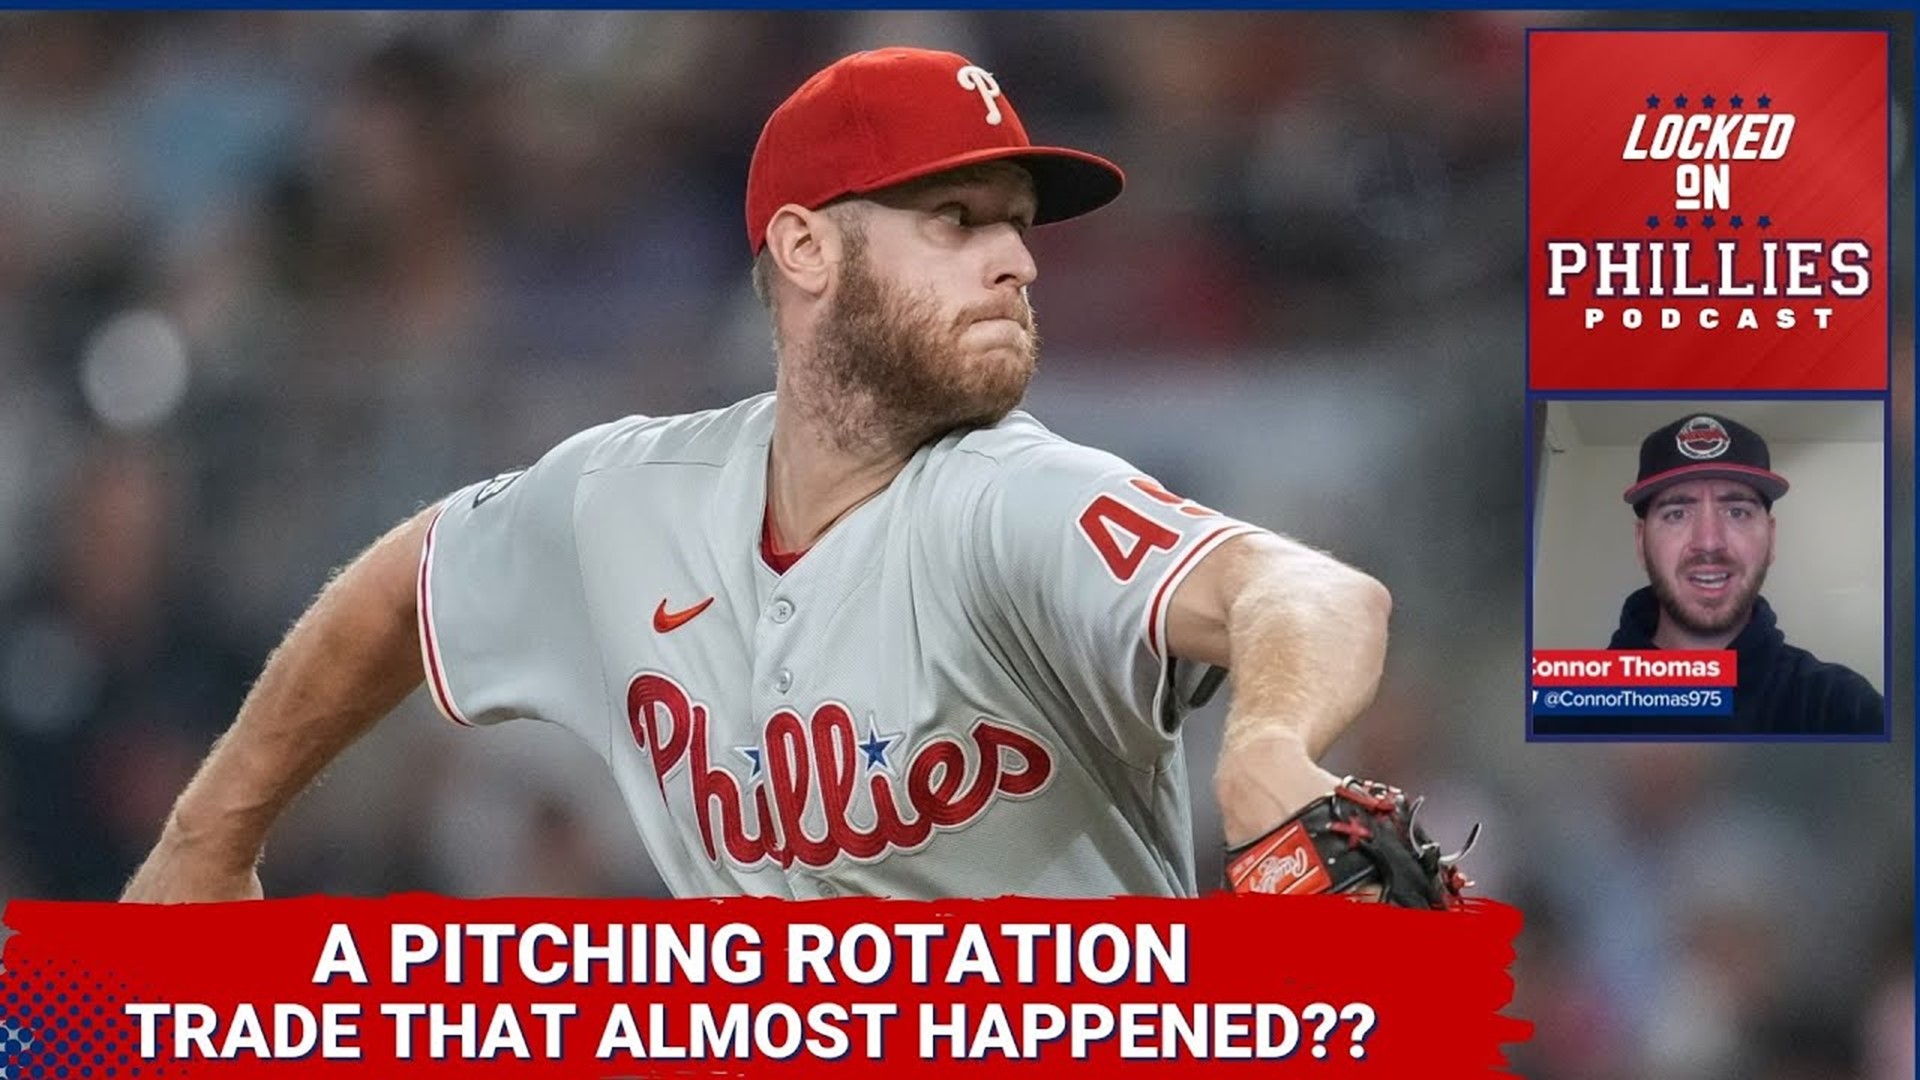 Connor discusses an article that breaks down a three-way trade between the Philadelphia Phillies, New York Yankees, and Seattle Mariners that fell through.